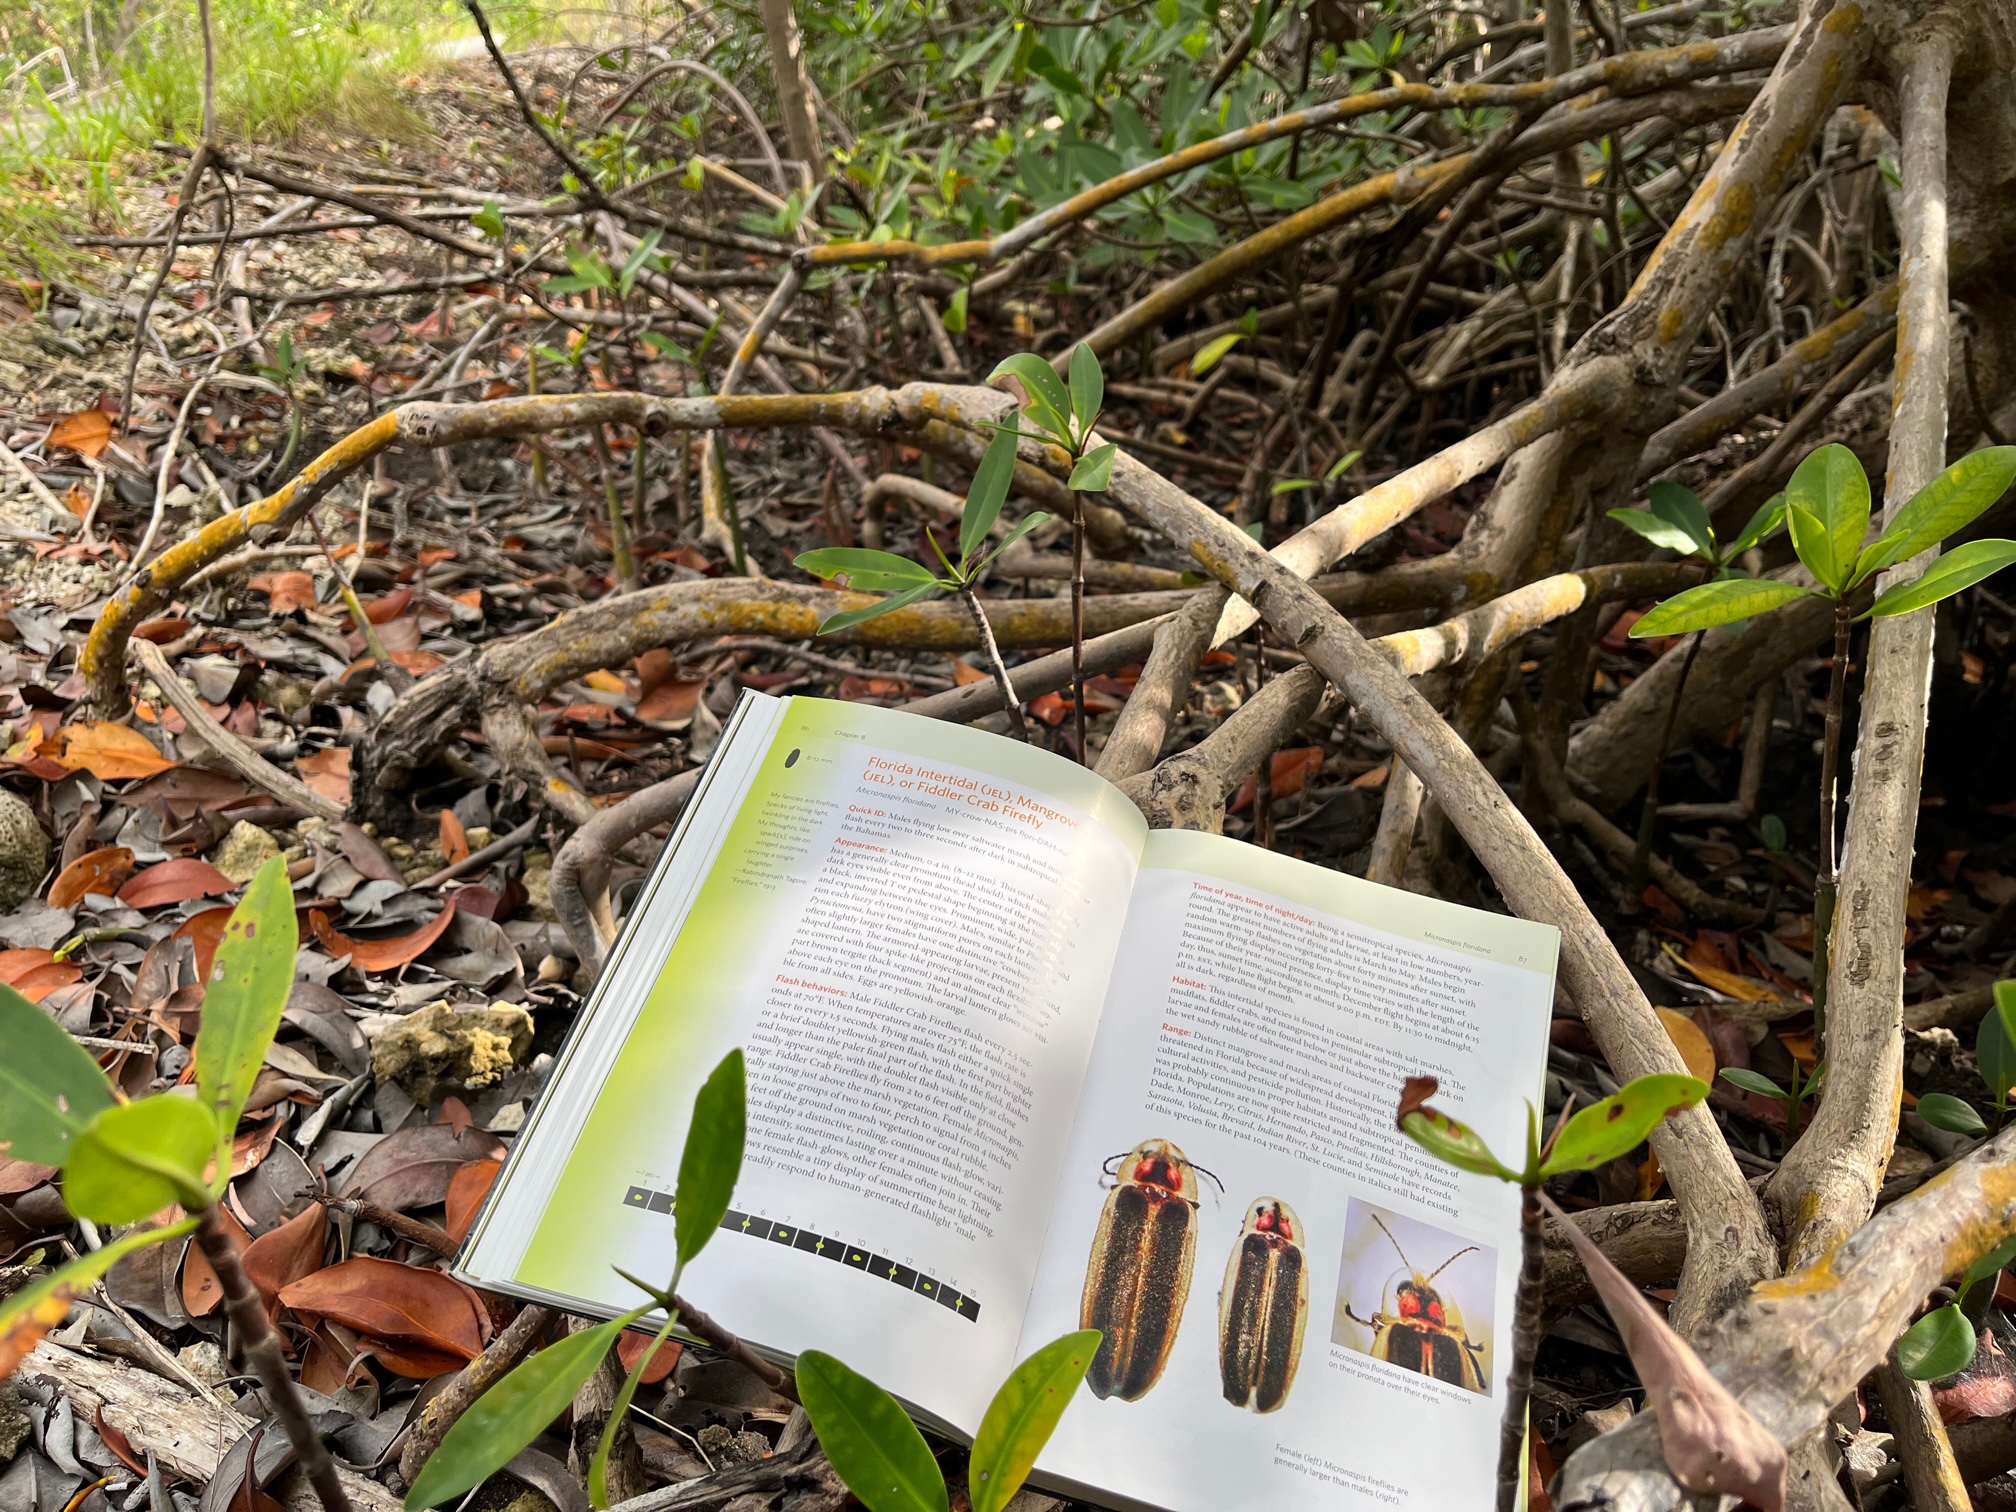 A firefly field guide opened to the Florida intertidal firefly page and propped on the ground against mangrove roots.